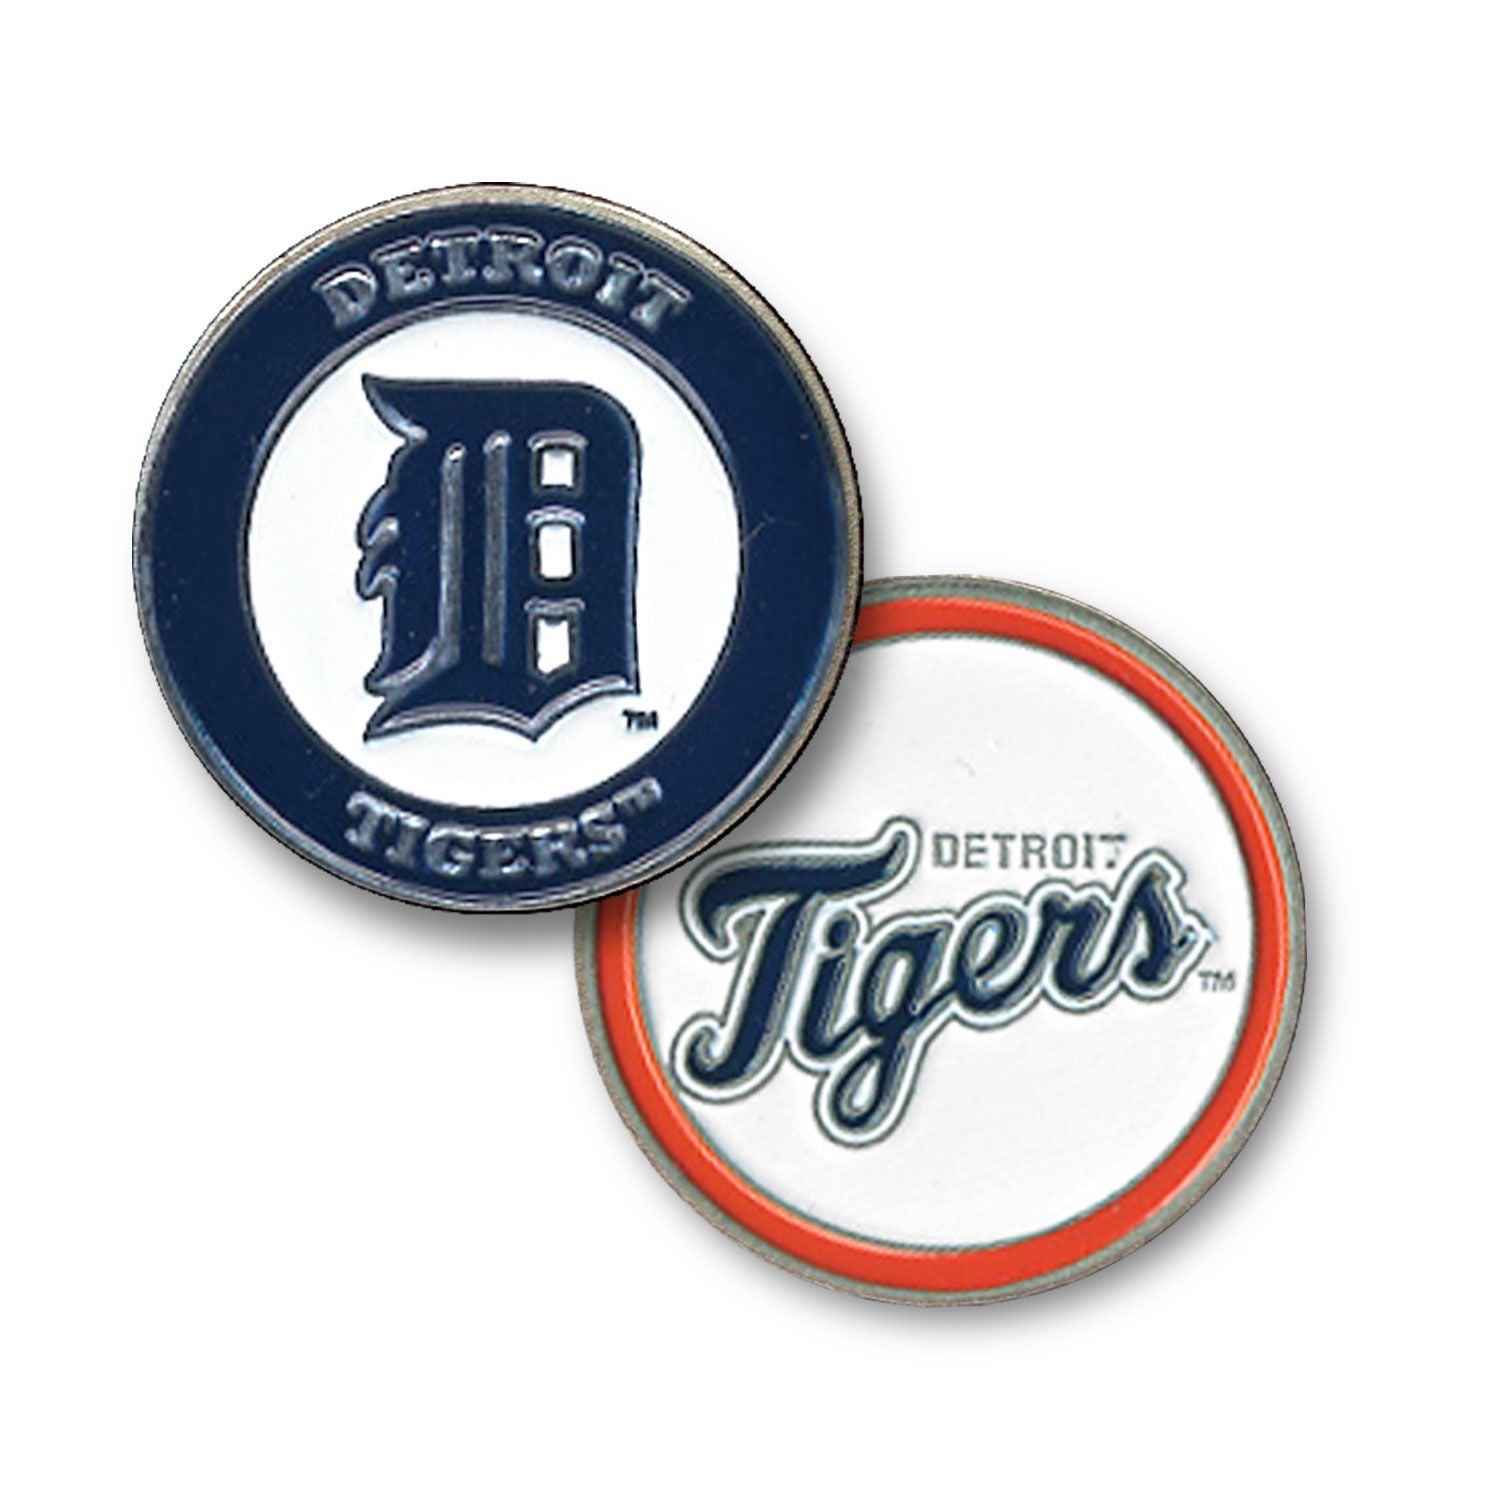 DETROIT TIGERS DOUBLE SIDED BALL MA